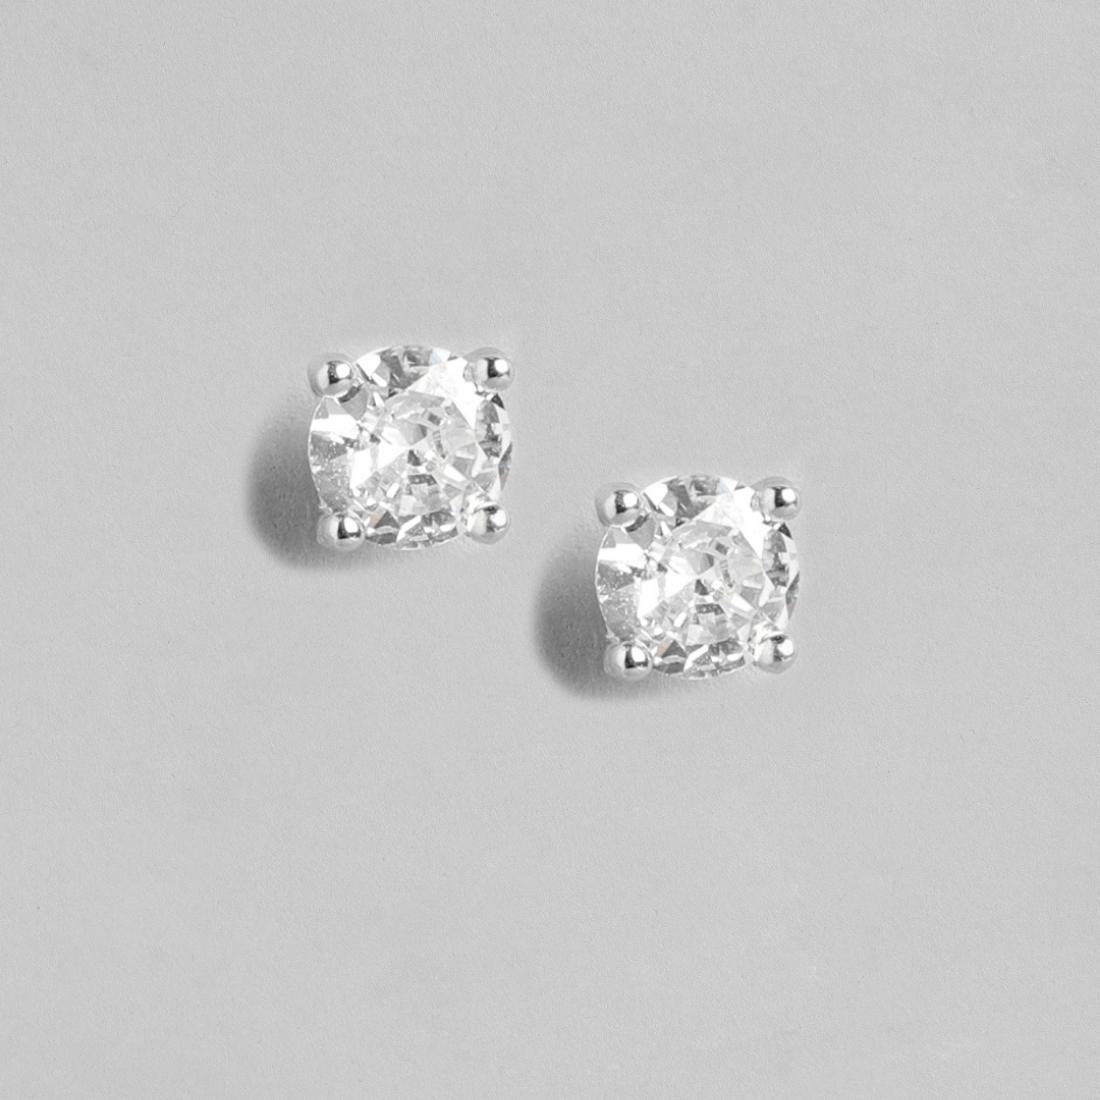 Minimal Solitaire 925 Silver Jewellery Set